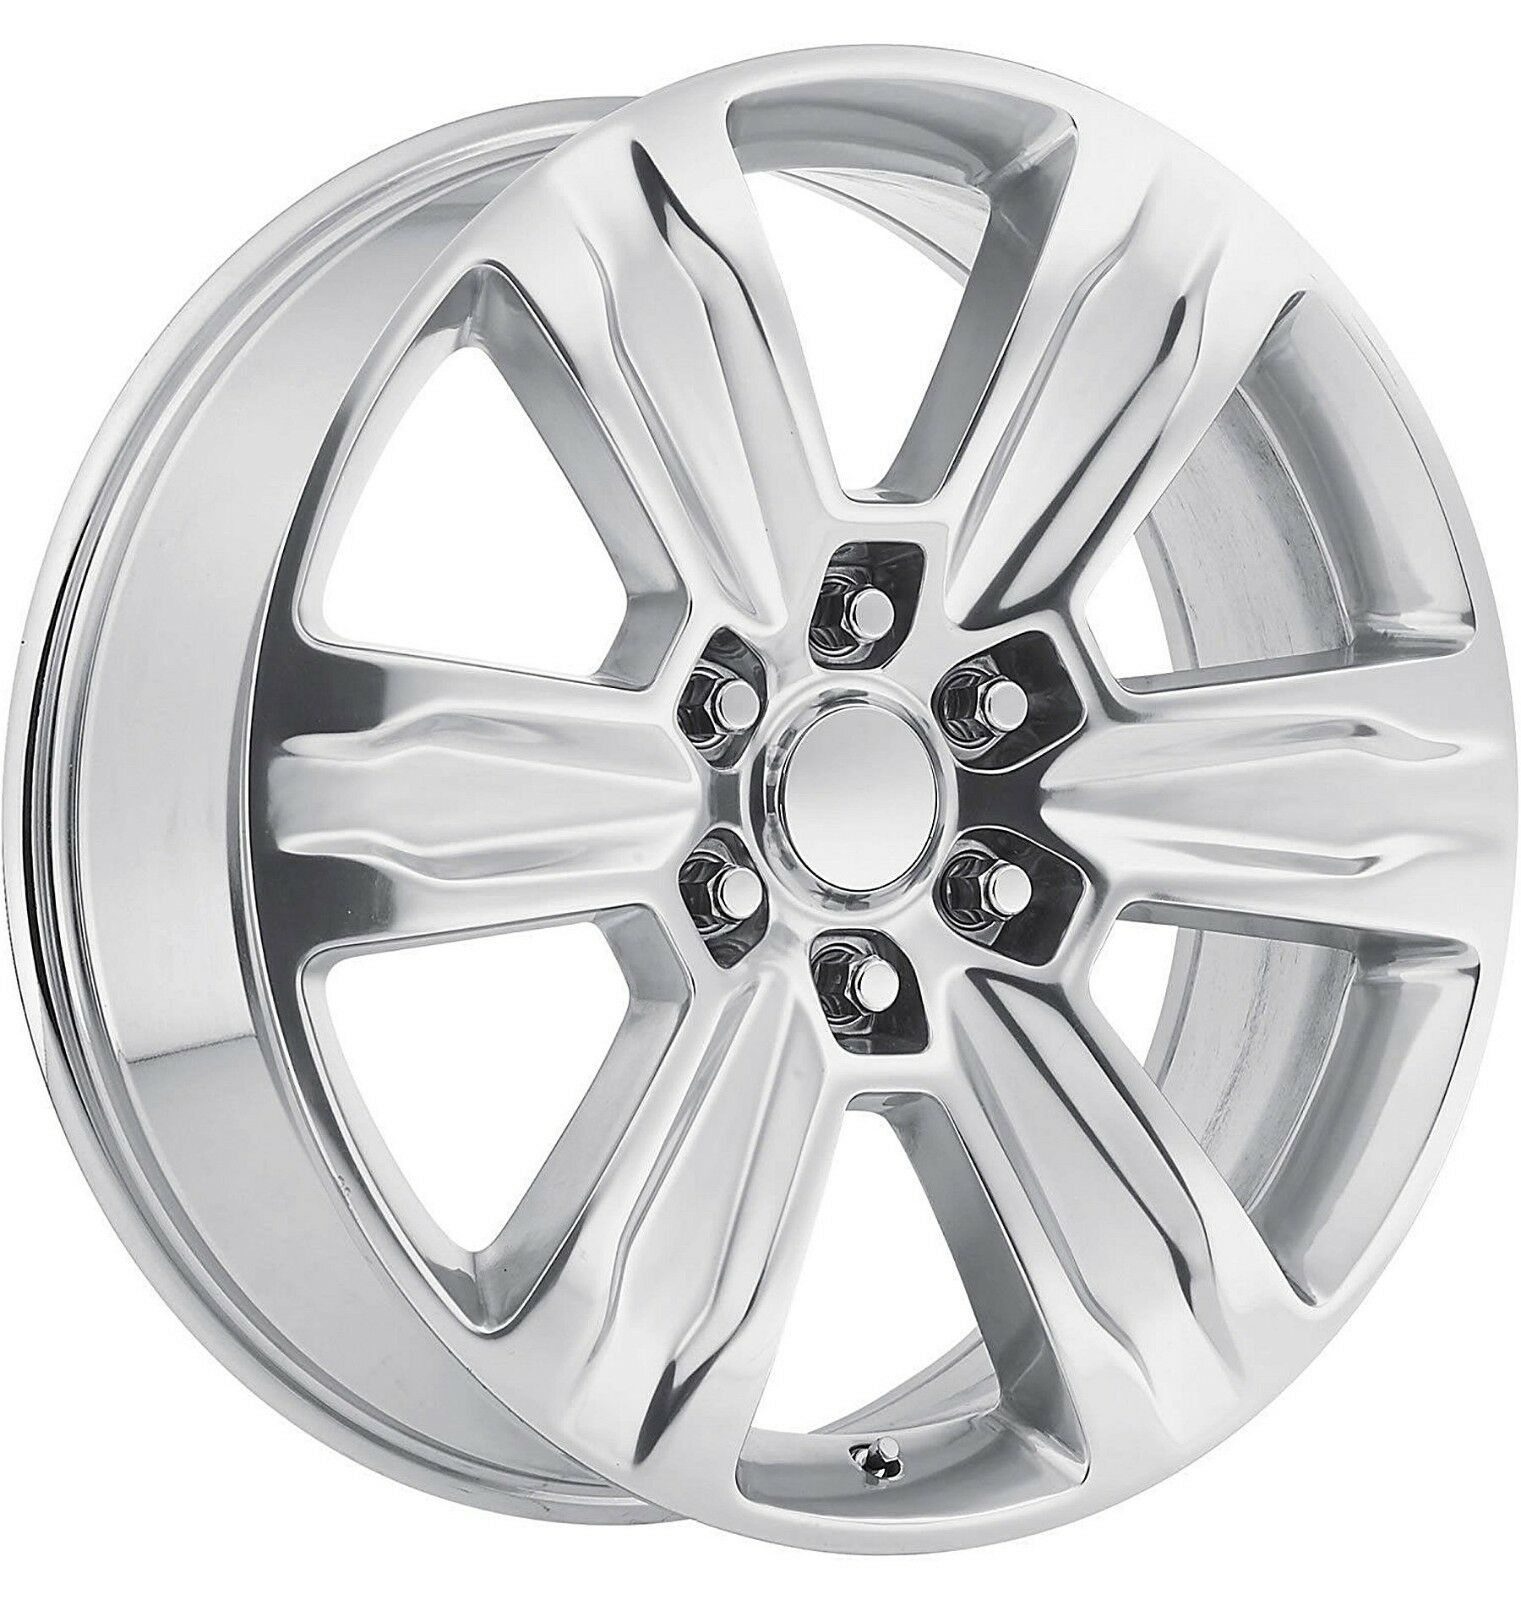 22" RW Wheels for Ford F150 2015 2018 Platinum Style Polished Rims